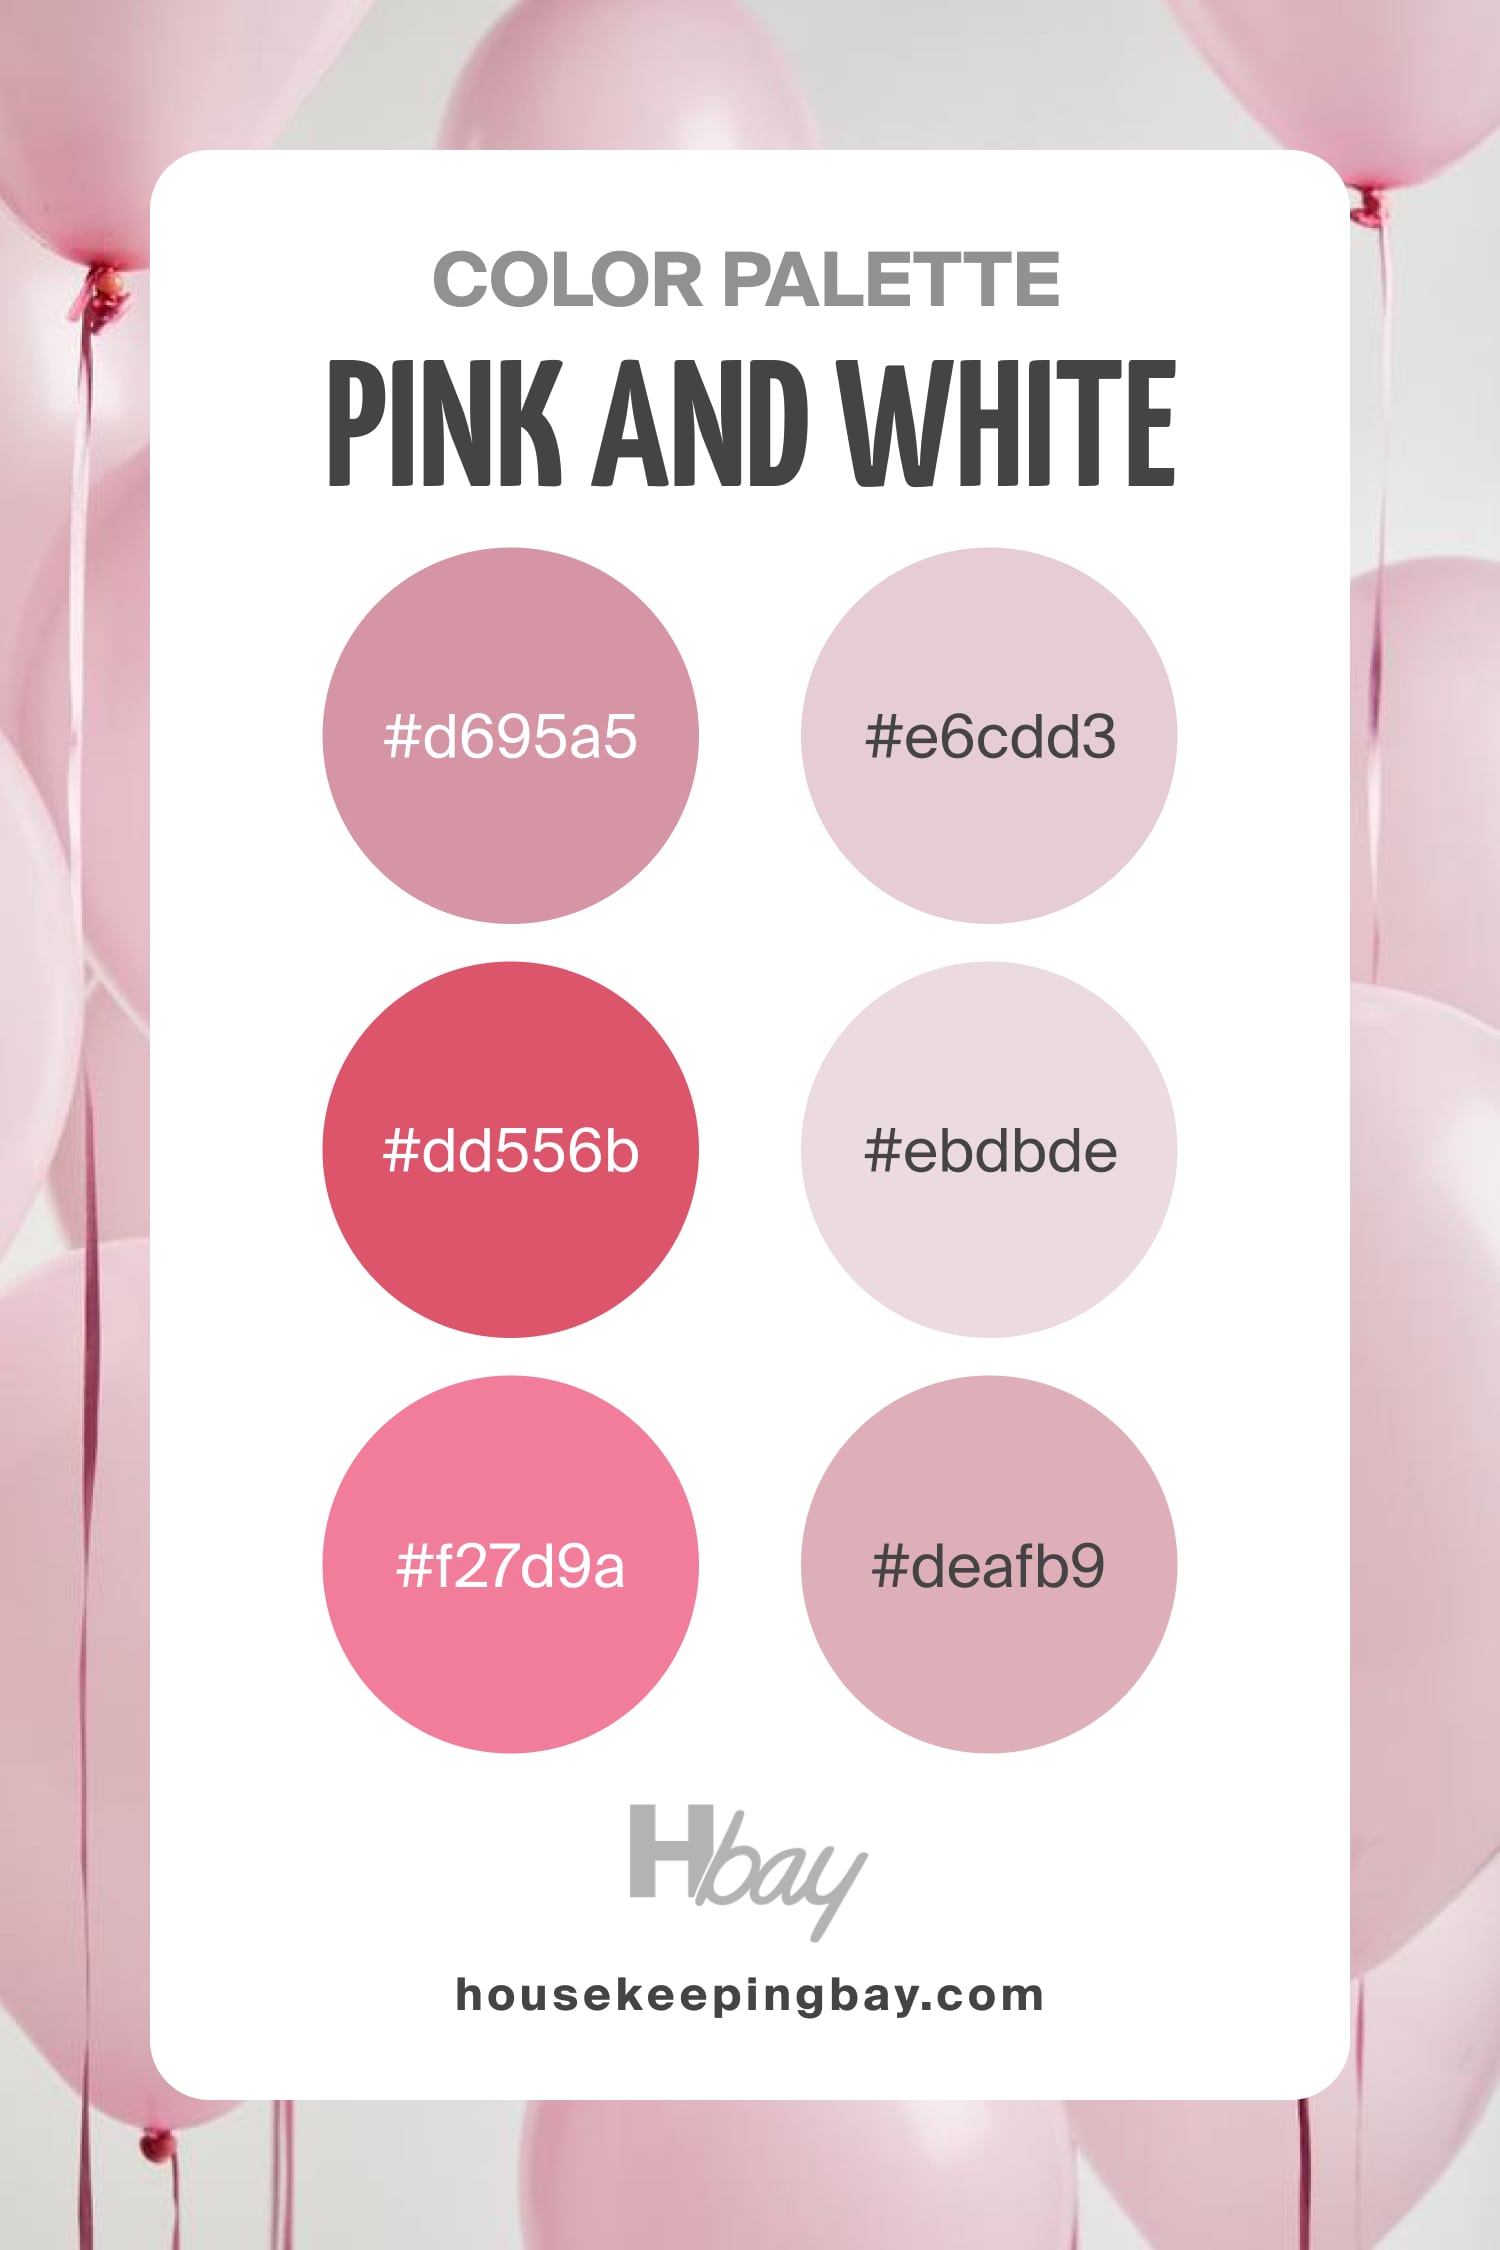 Pink and White Color Palette